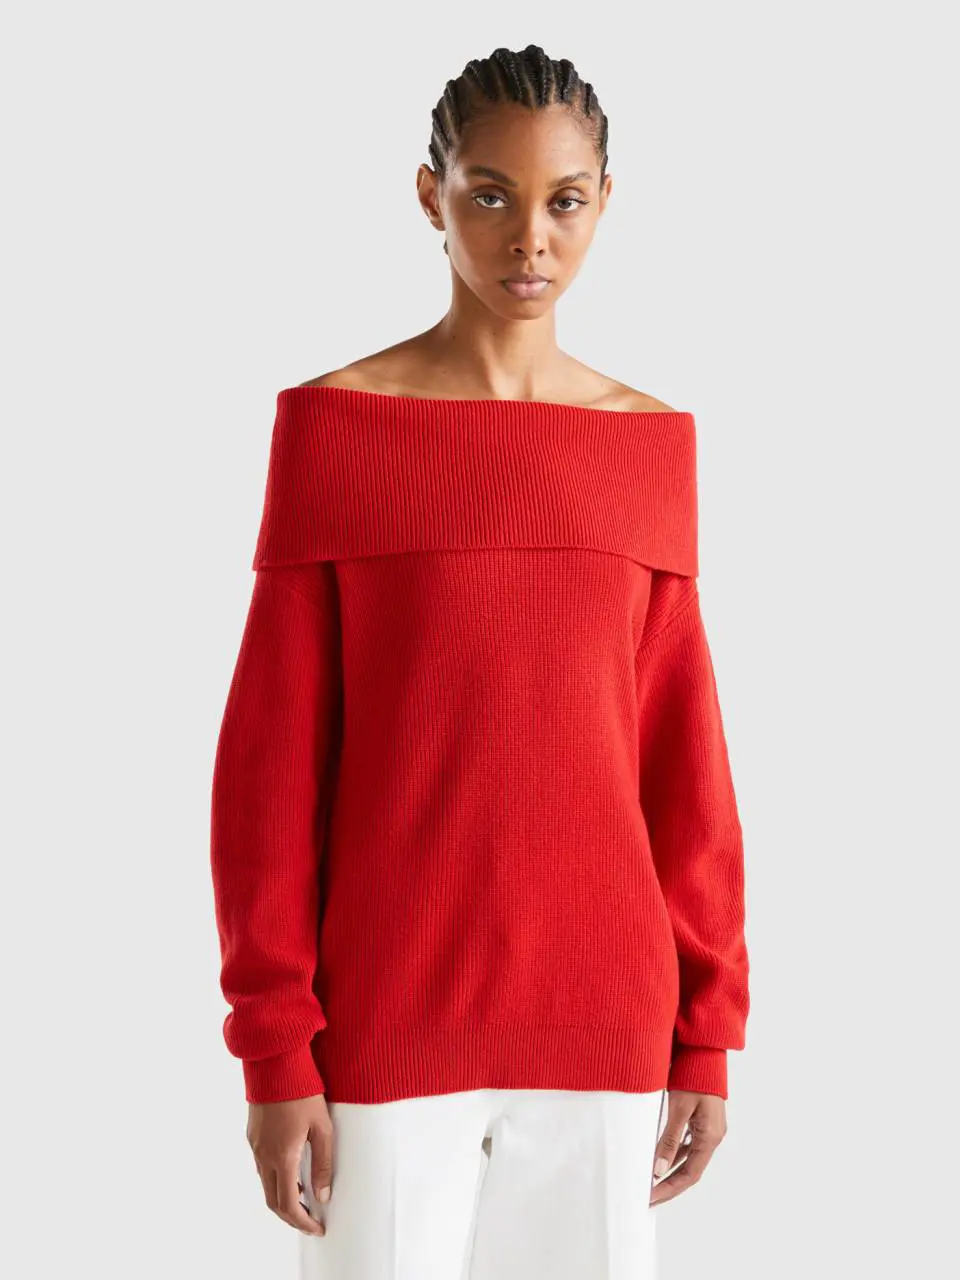 Benetton sweater with bare shoulders. 1